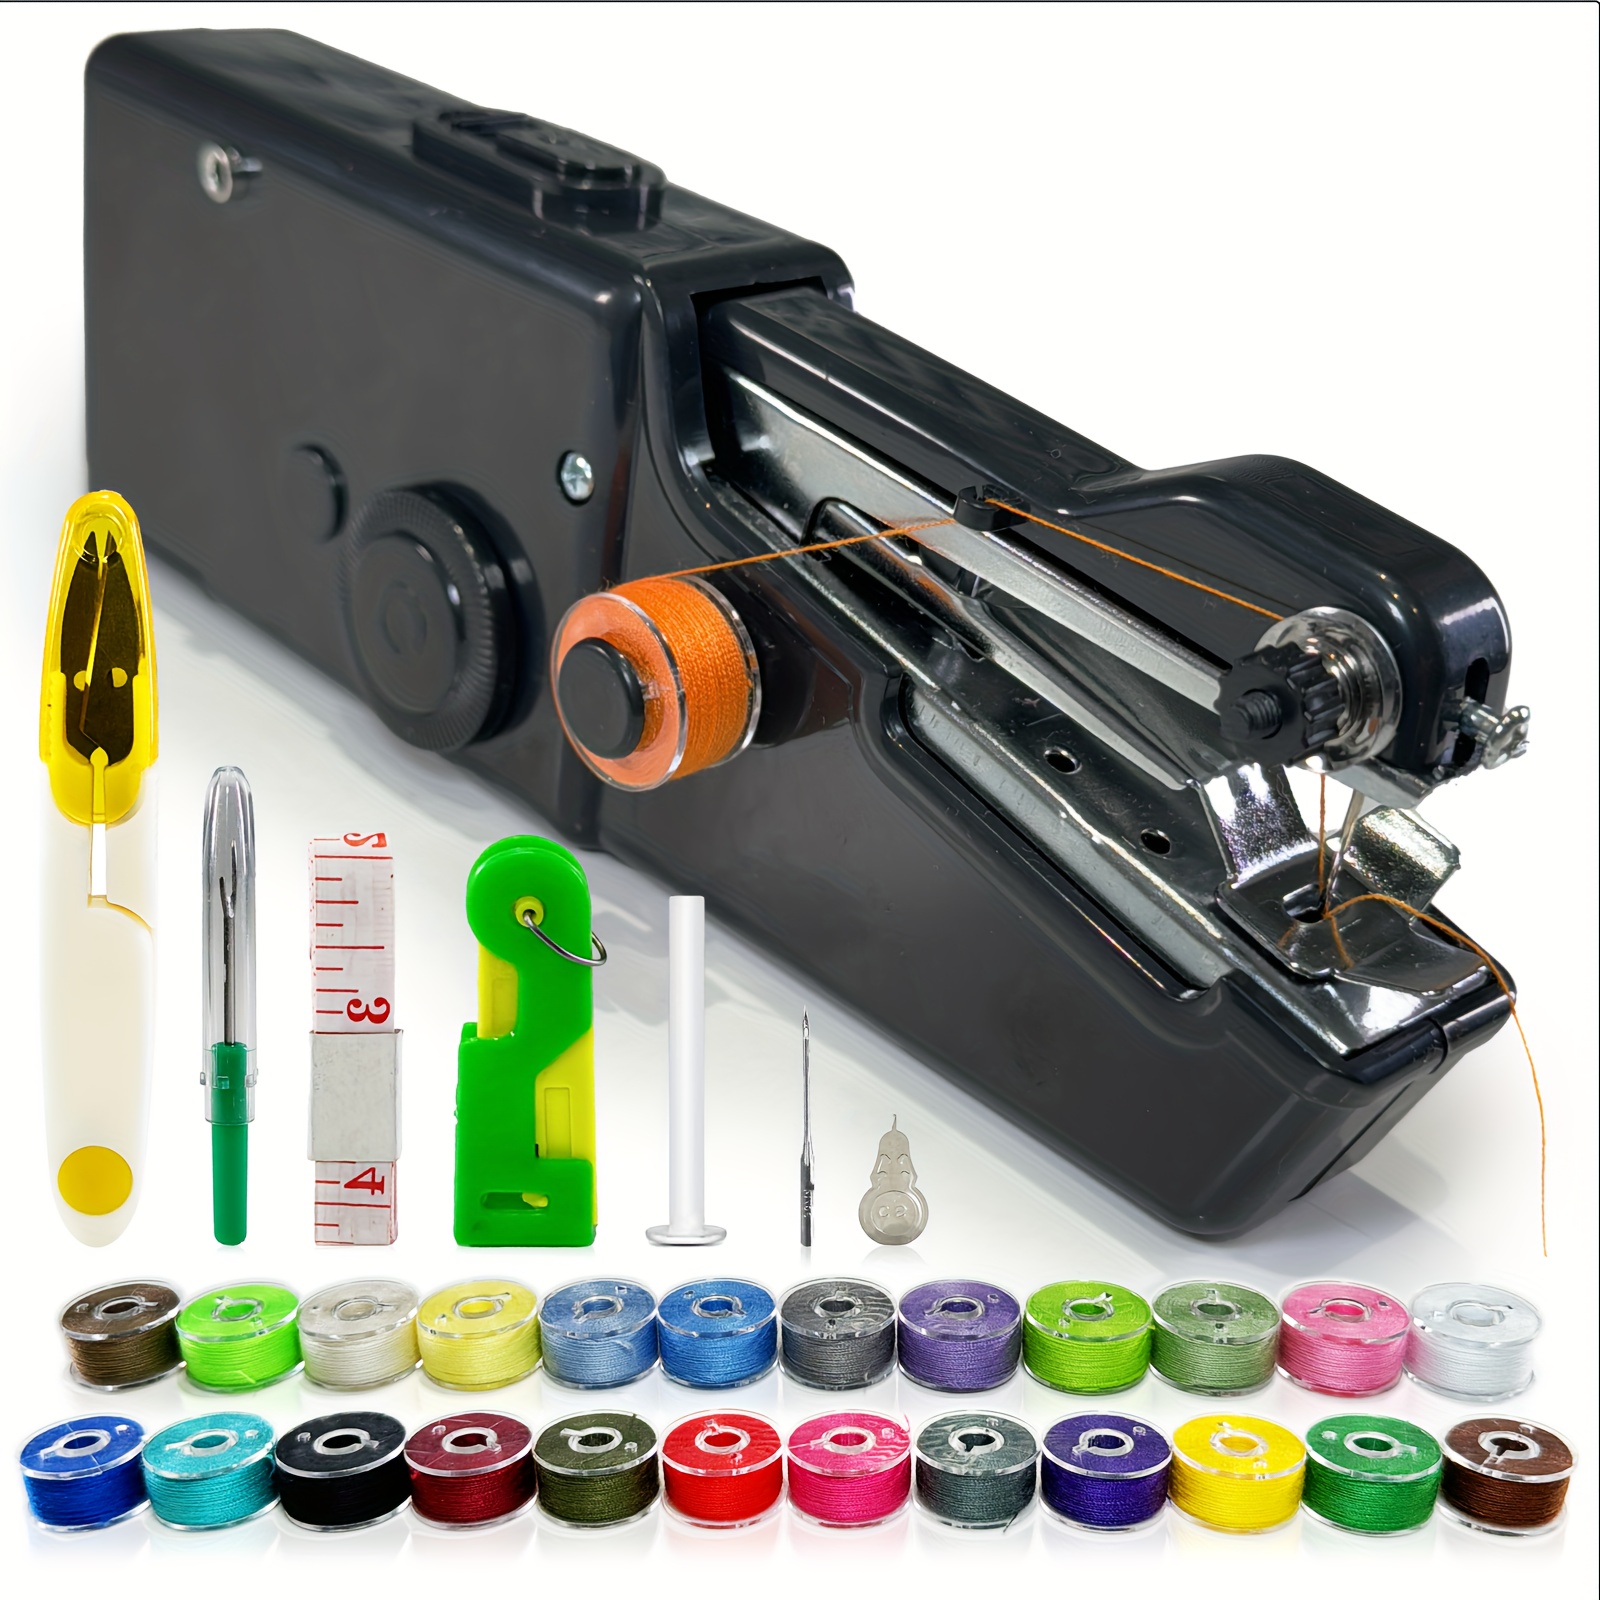 

Portable Handheld Sewing Machine Kit - 35 Pcs Electric & Manual Mini Sewer With Usb Power, Multi-colored Thread Set, Fabric & Clothes Repair - Travel-friendly, Easy For Beginners, No Battery Needed